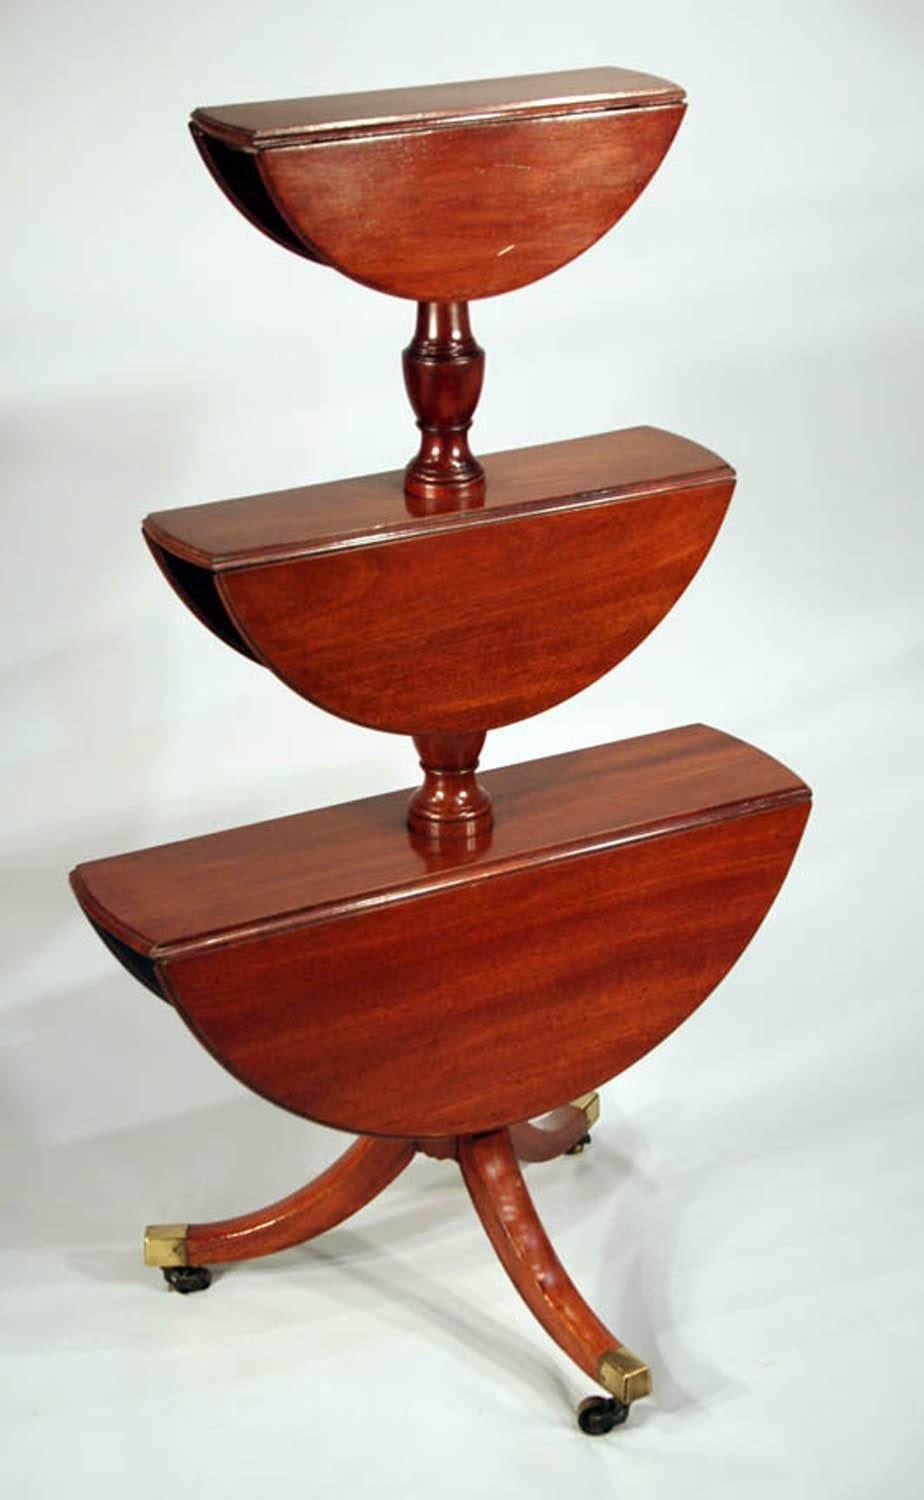 Small-scale George III Sheraton three-tier dumbwaiter in mahogany, having 
circular shelves with drop leaves, vasiform pillars and down swept legs 
ending in brass casters.
English, circa 1790.
 